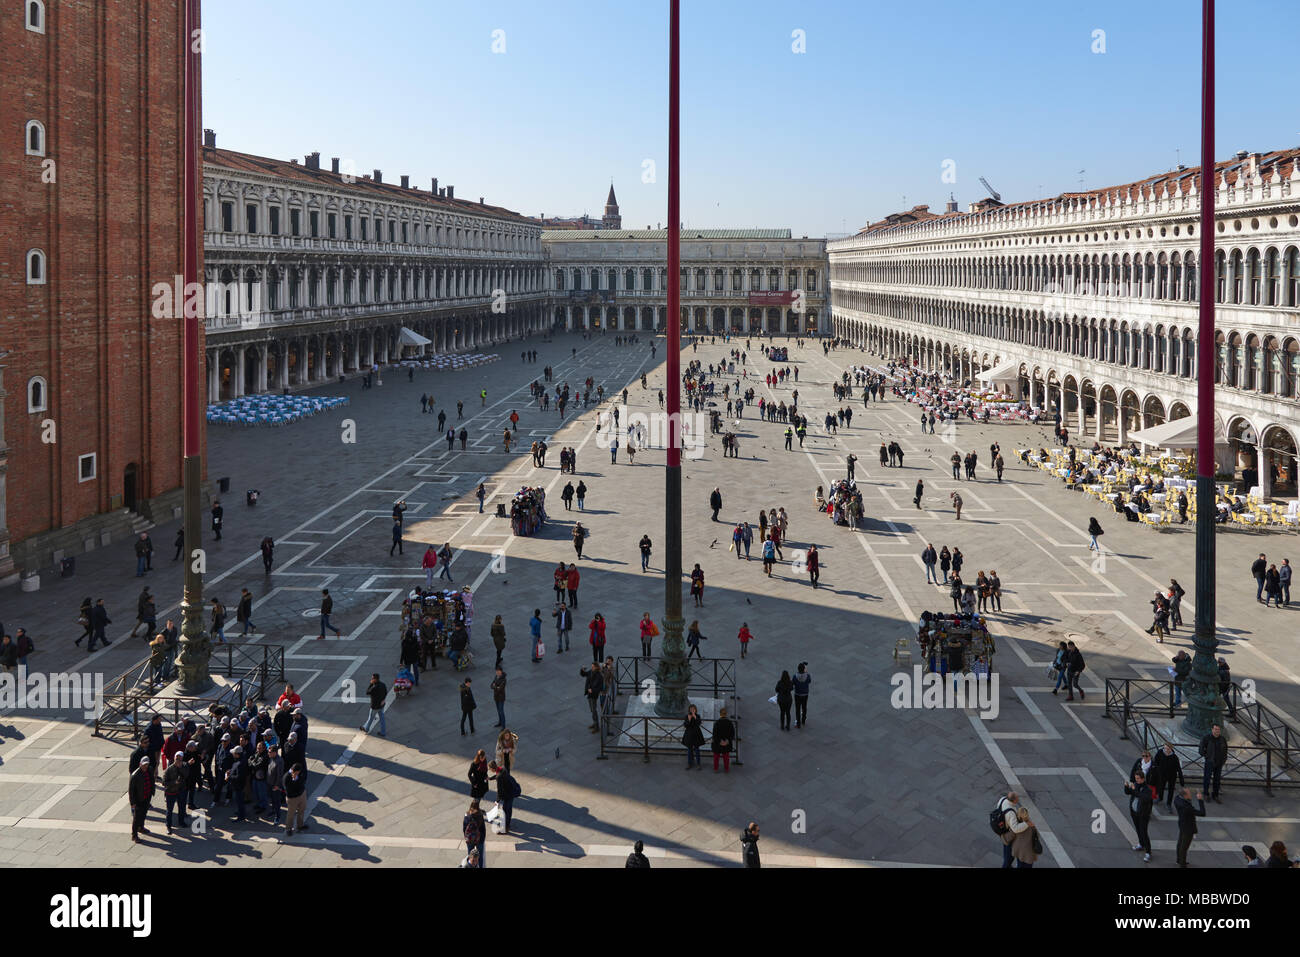 Venice, Italy - Febuary 19, 2016: Piazza San Marco in Venice. Venice is famous for its settings, archtecture and artwork. A part of Venice is resignat Stock Photo